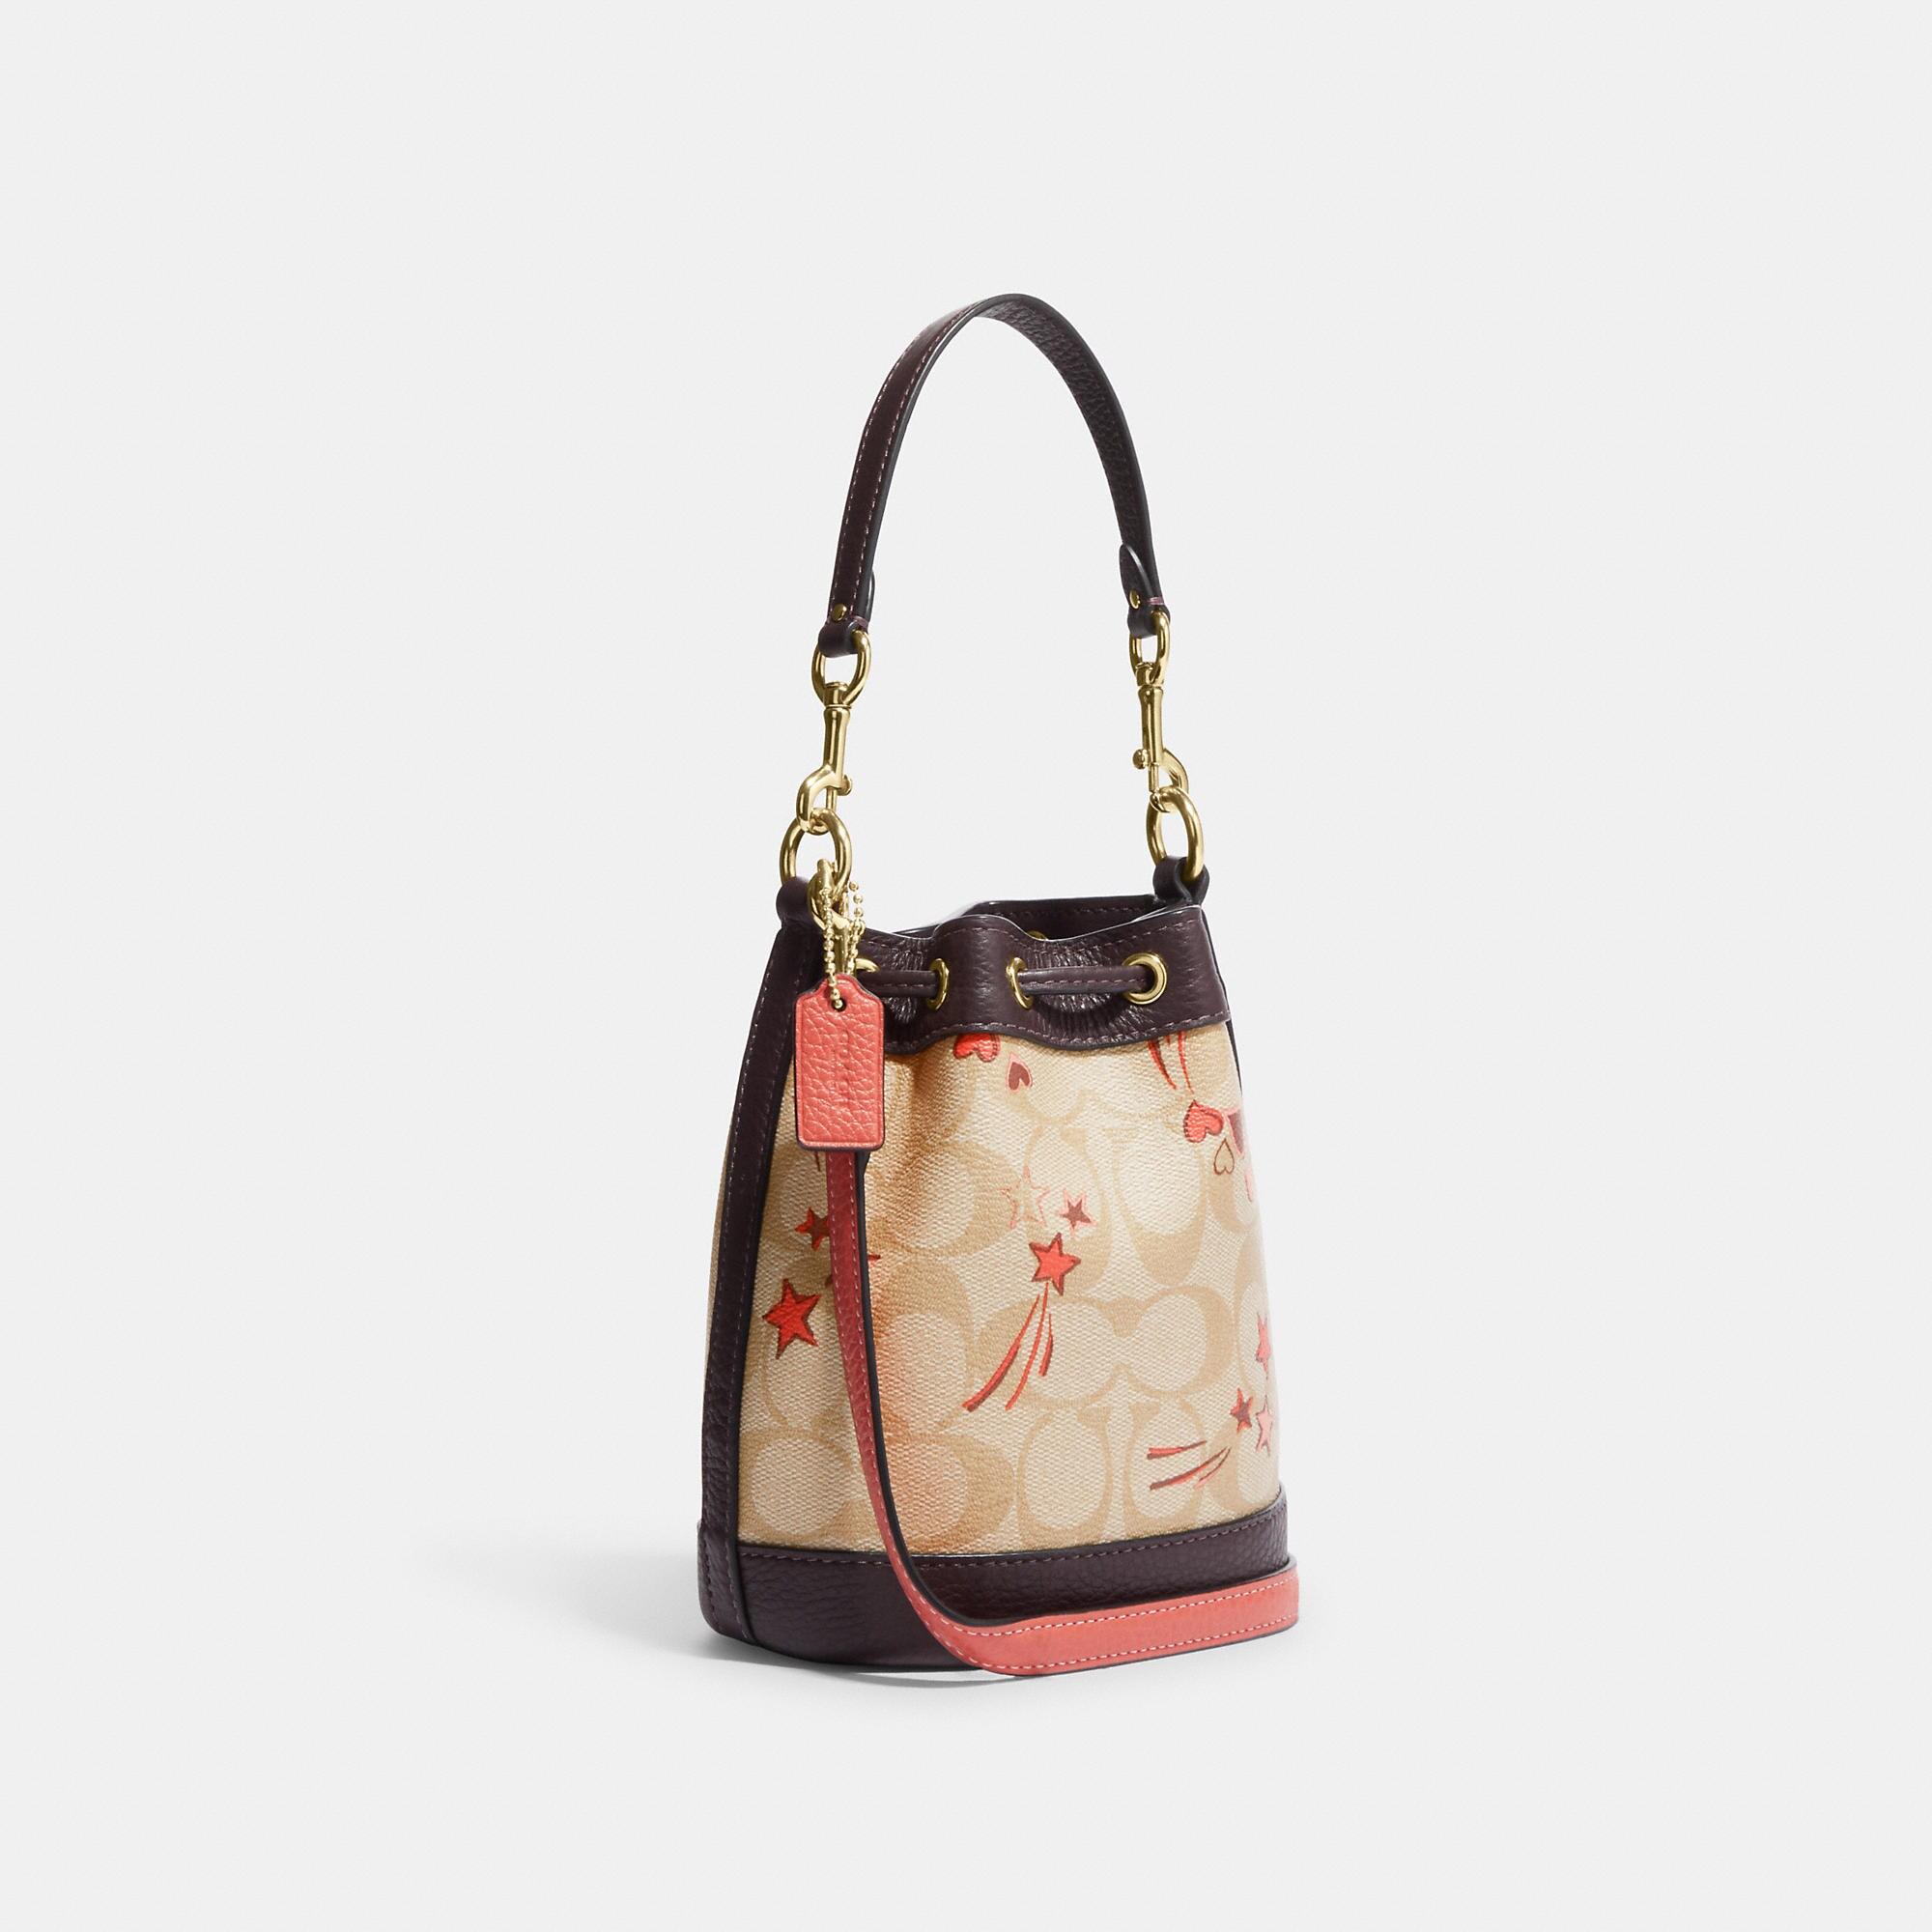 Coach Field Tote 22 in Signature Canvas with Heart Print